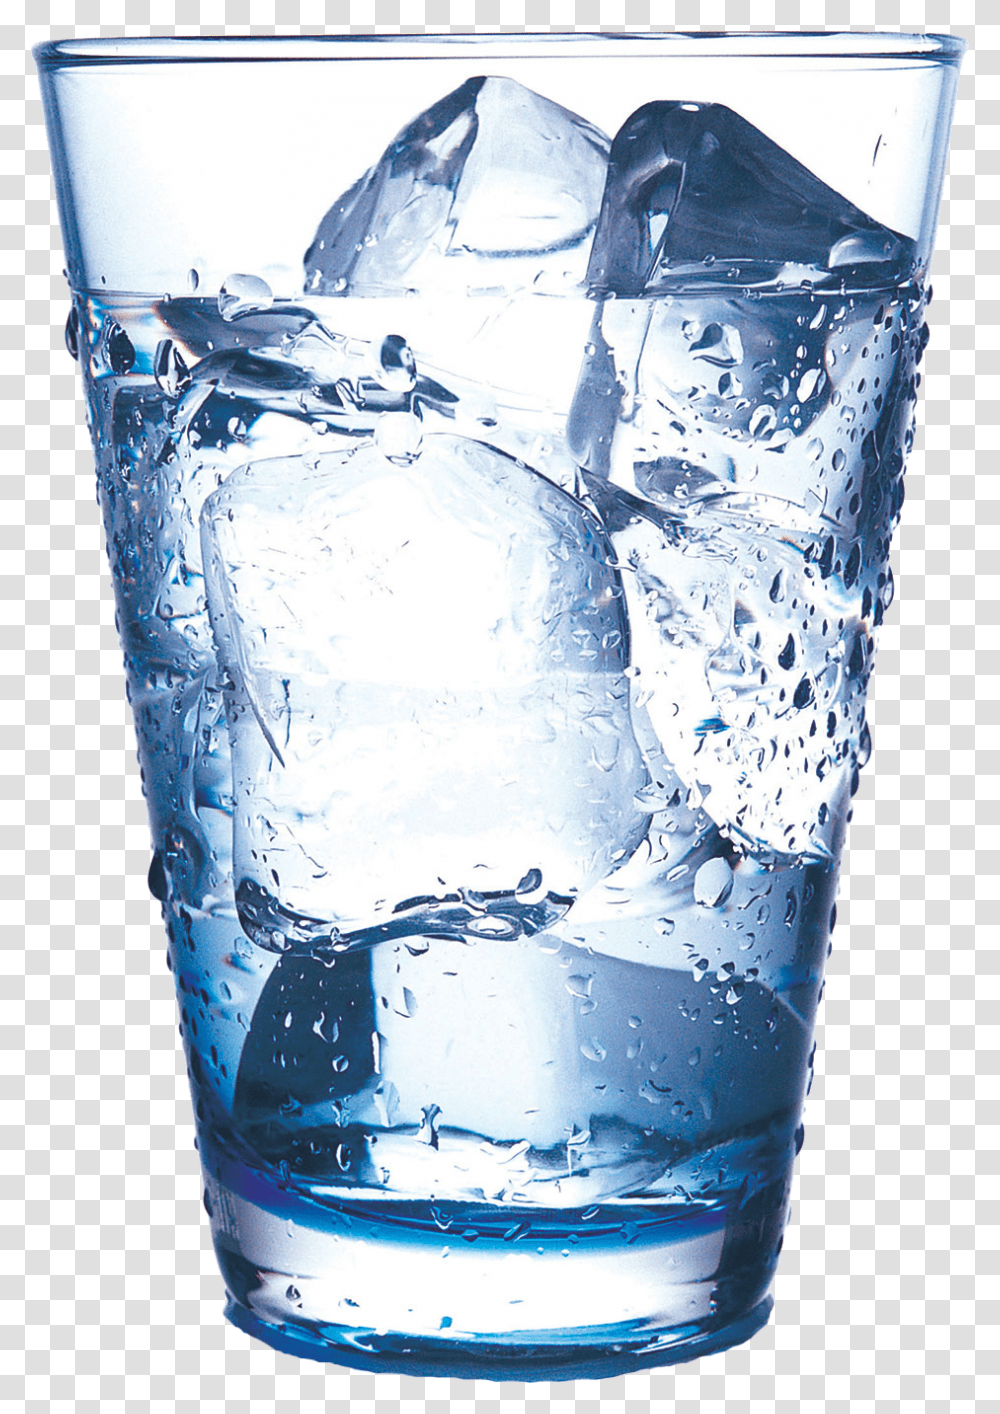 Water On Glass Glass Of Ice Water, Bottle, Mineral Water, Beverage, Water Bottle Transparent Png